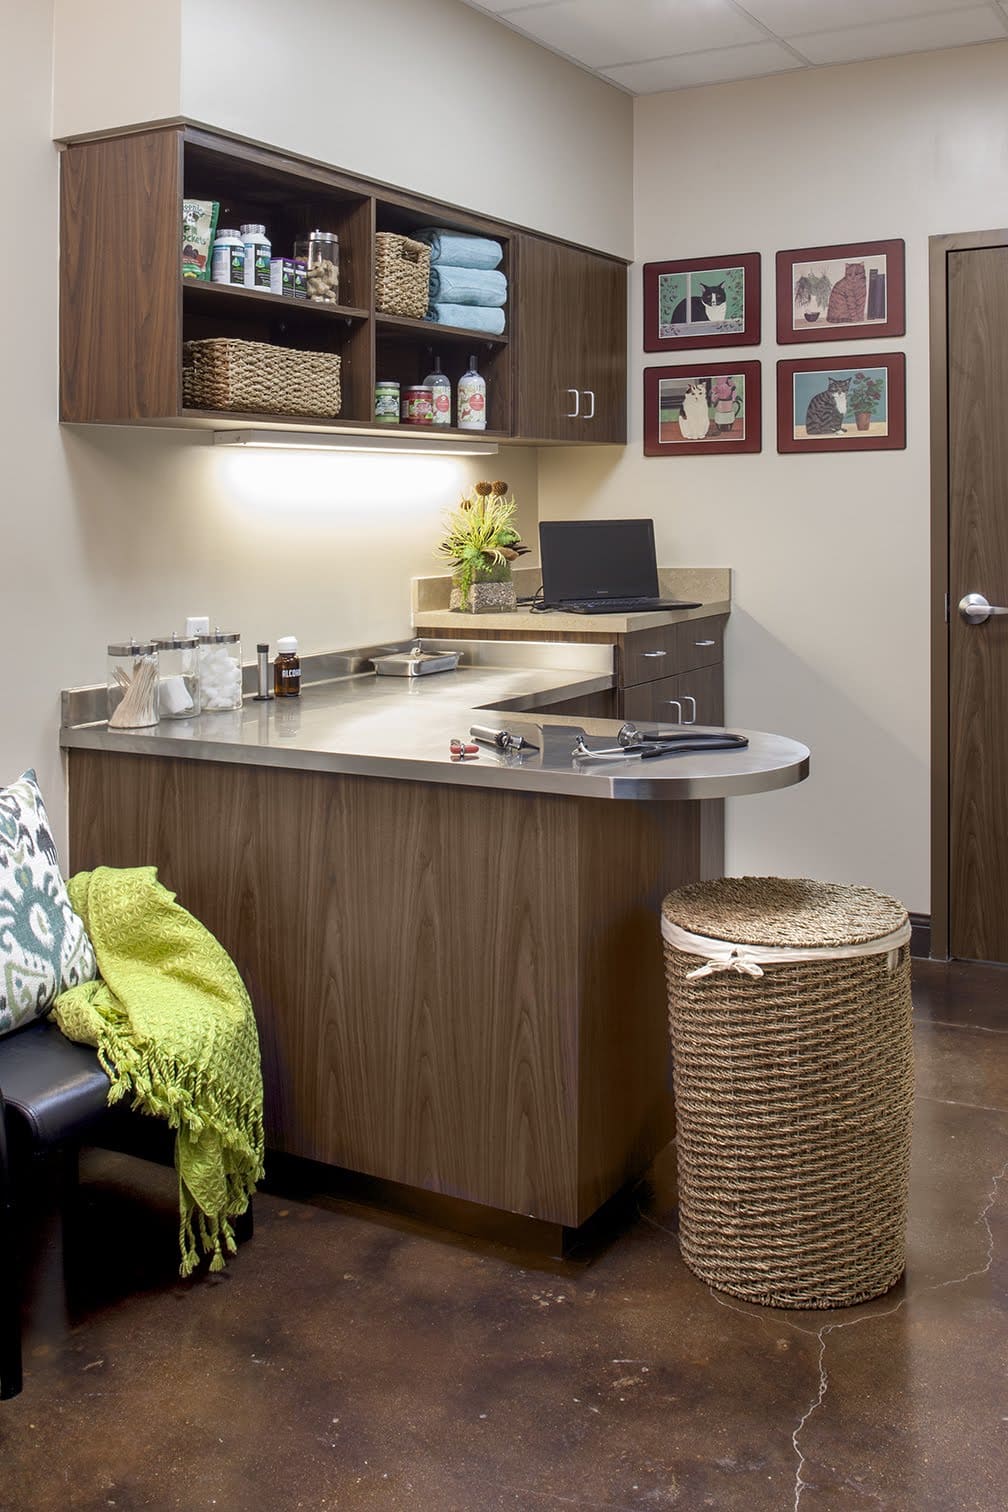 Veterinary Clinic with custom millwork and cabinetry by Kaemark